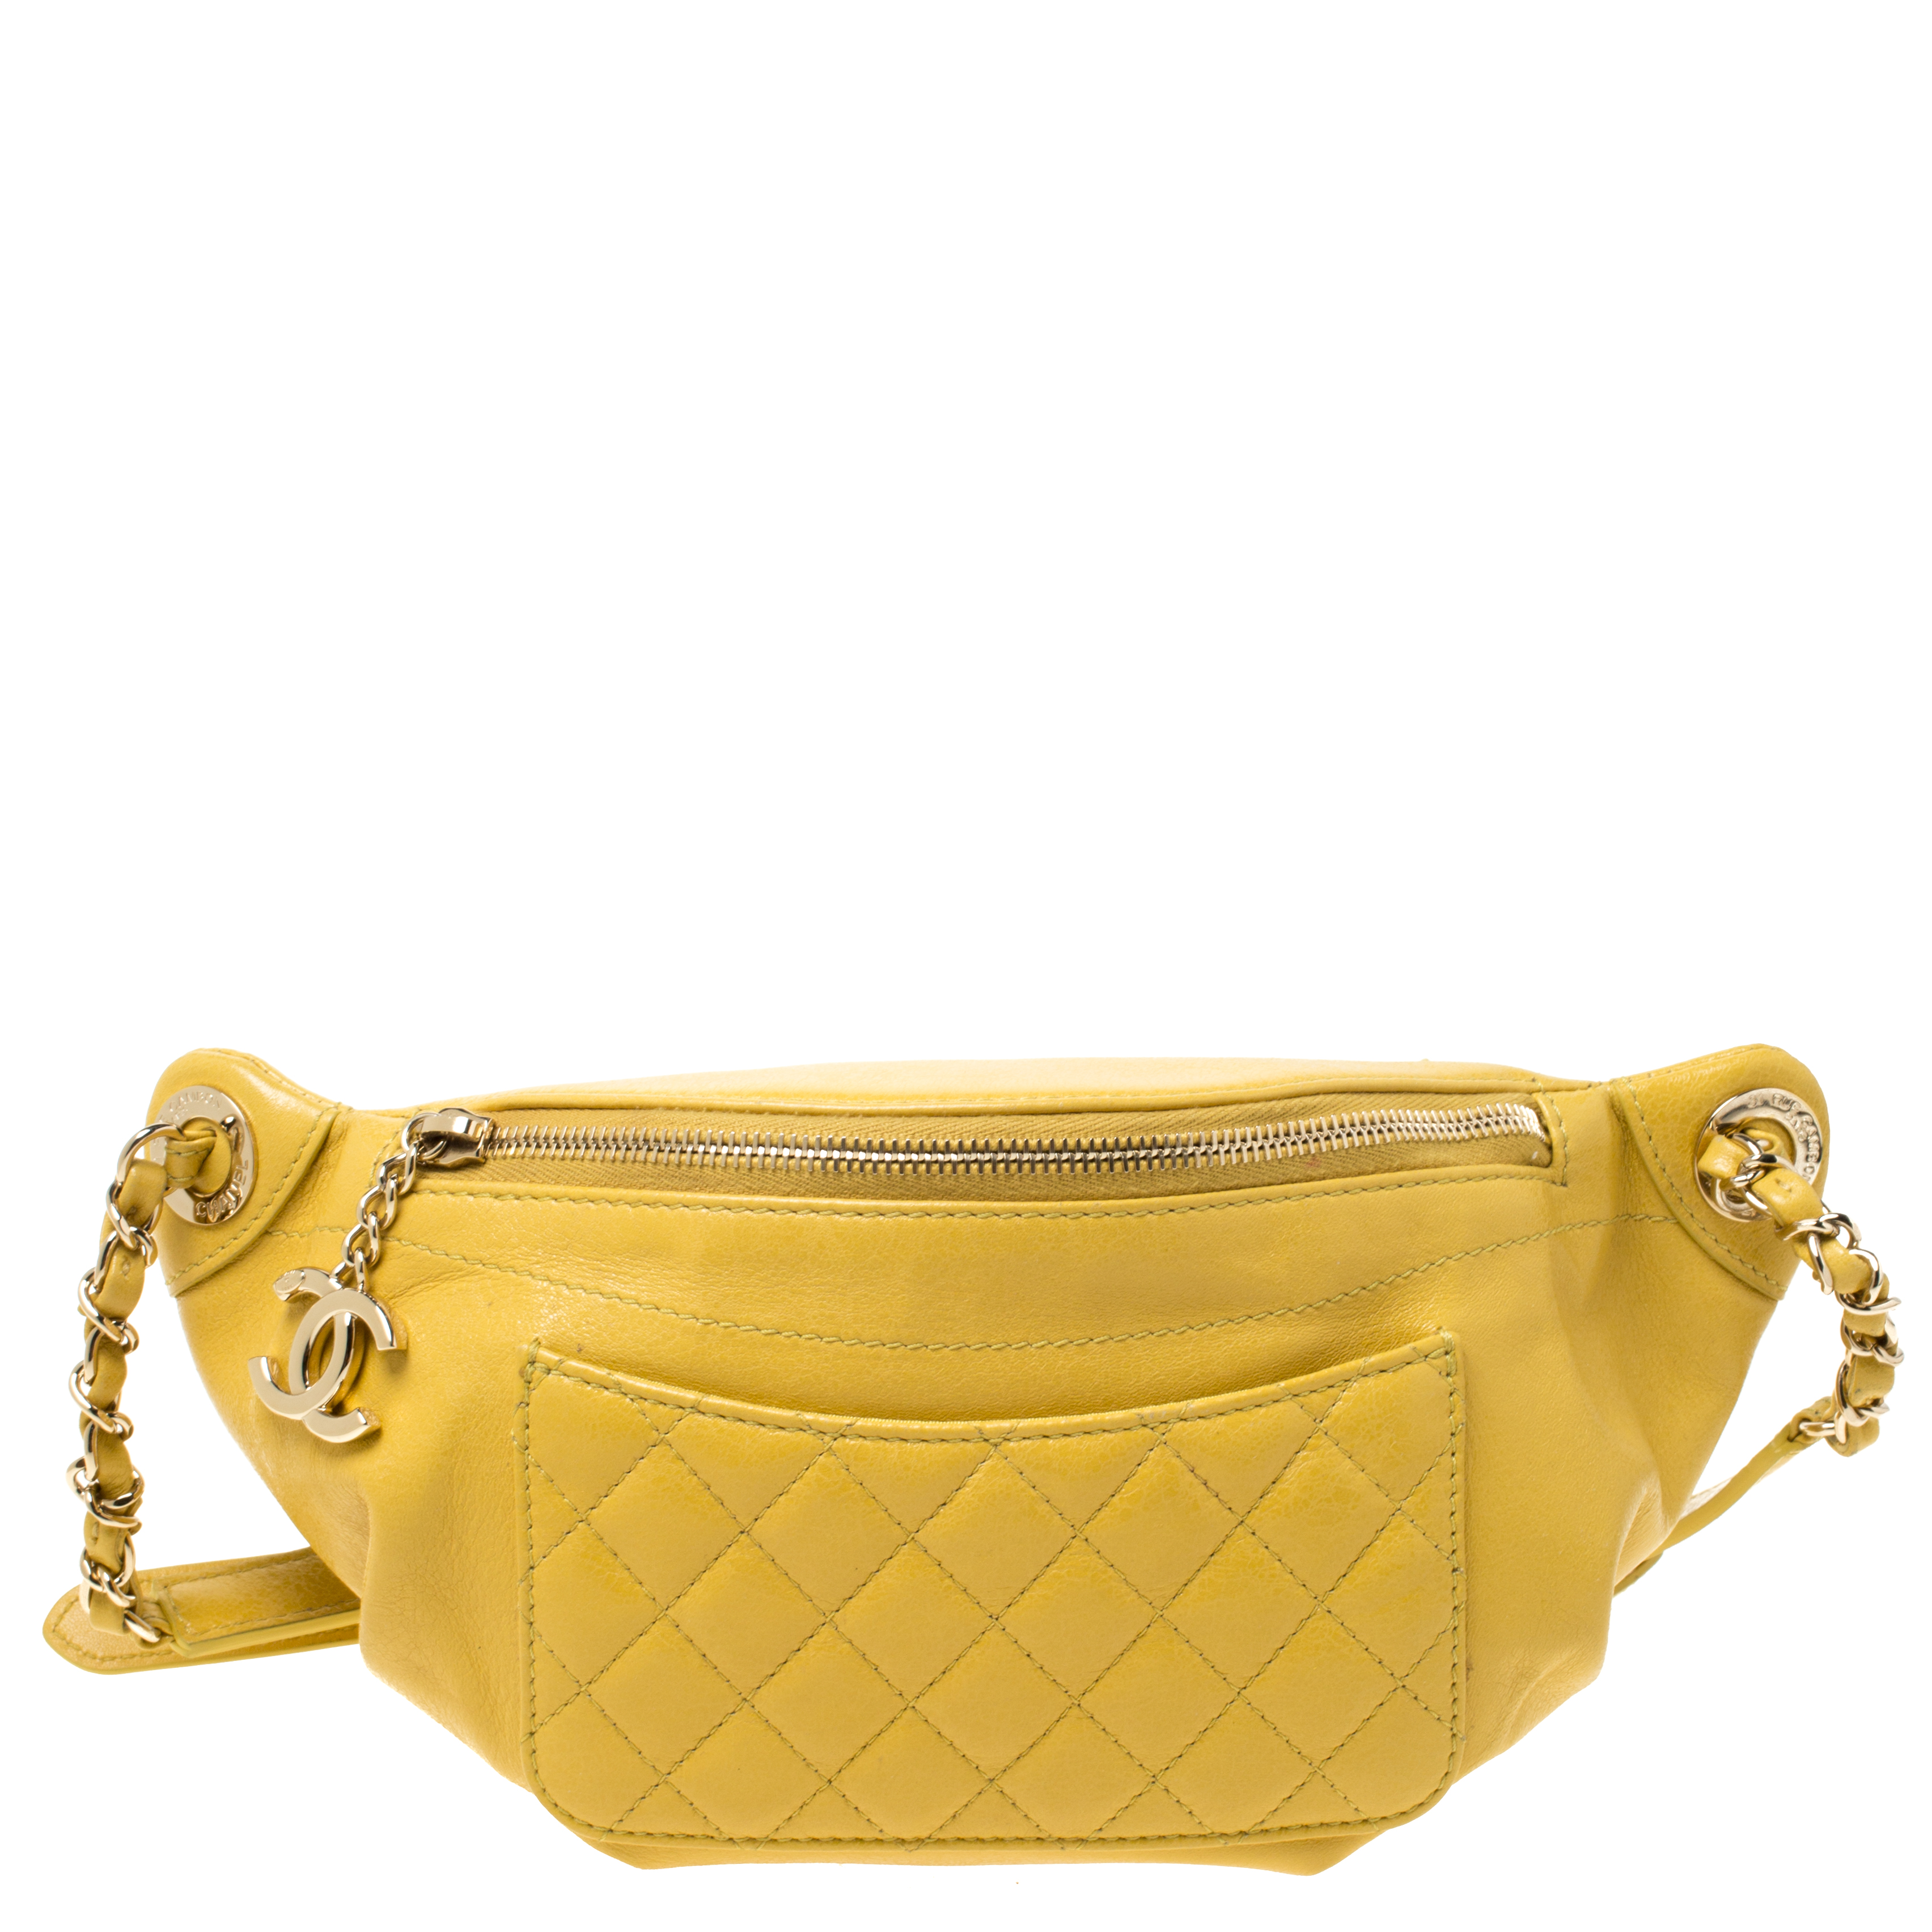 Chanel Yellow Quilted Leather Fanny Pack Waistbelt Bag Chanel | The ...